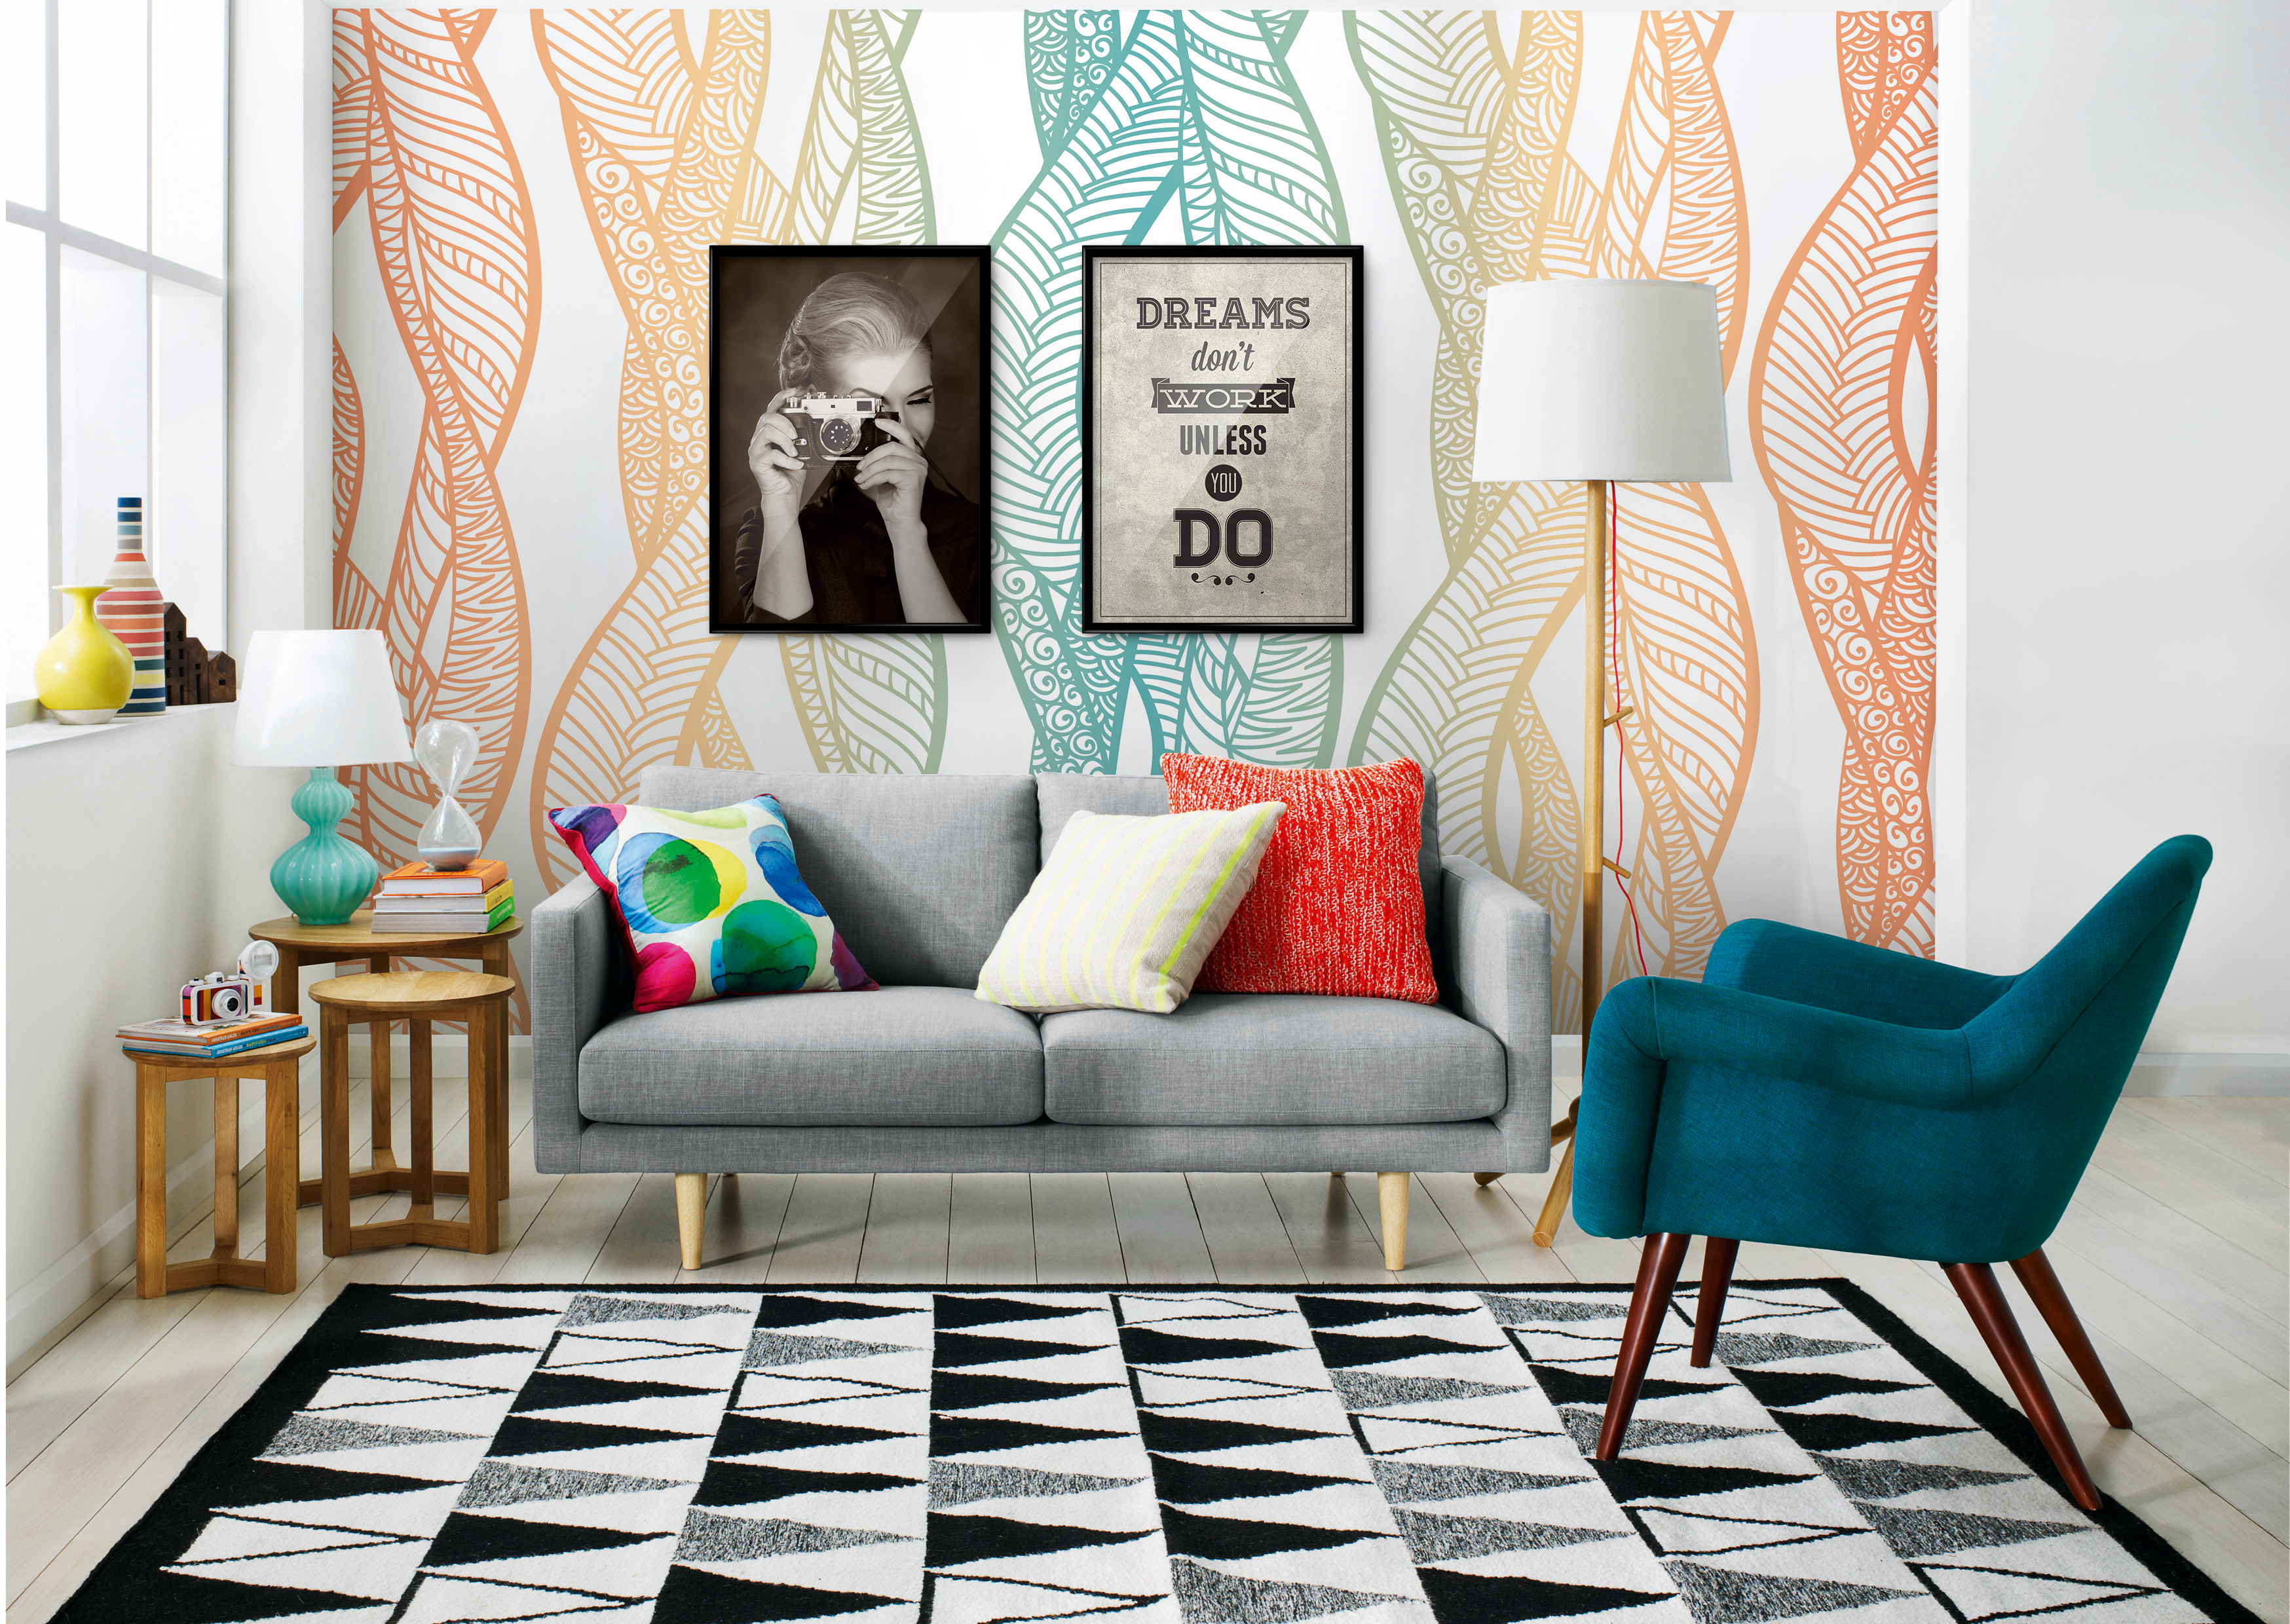 Over the rainbow • Living room - Retro - Wall Murals - Posters - Abstraction - People - Art & lifestyle